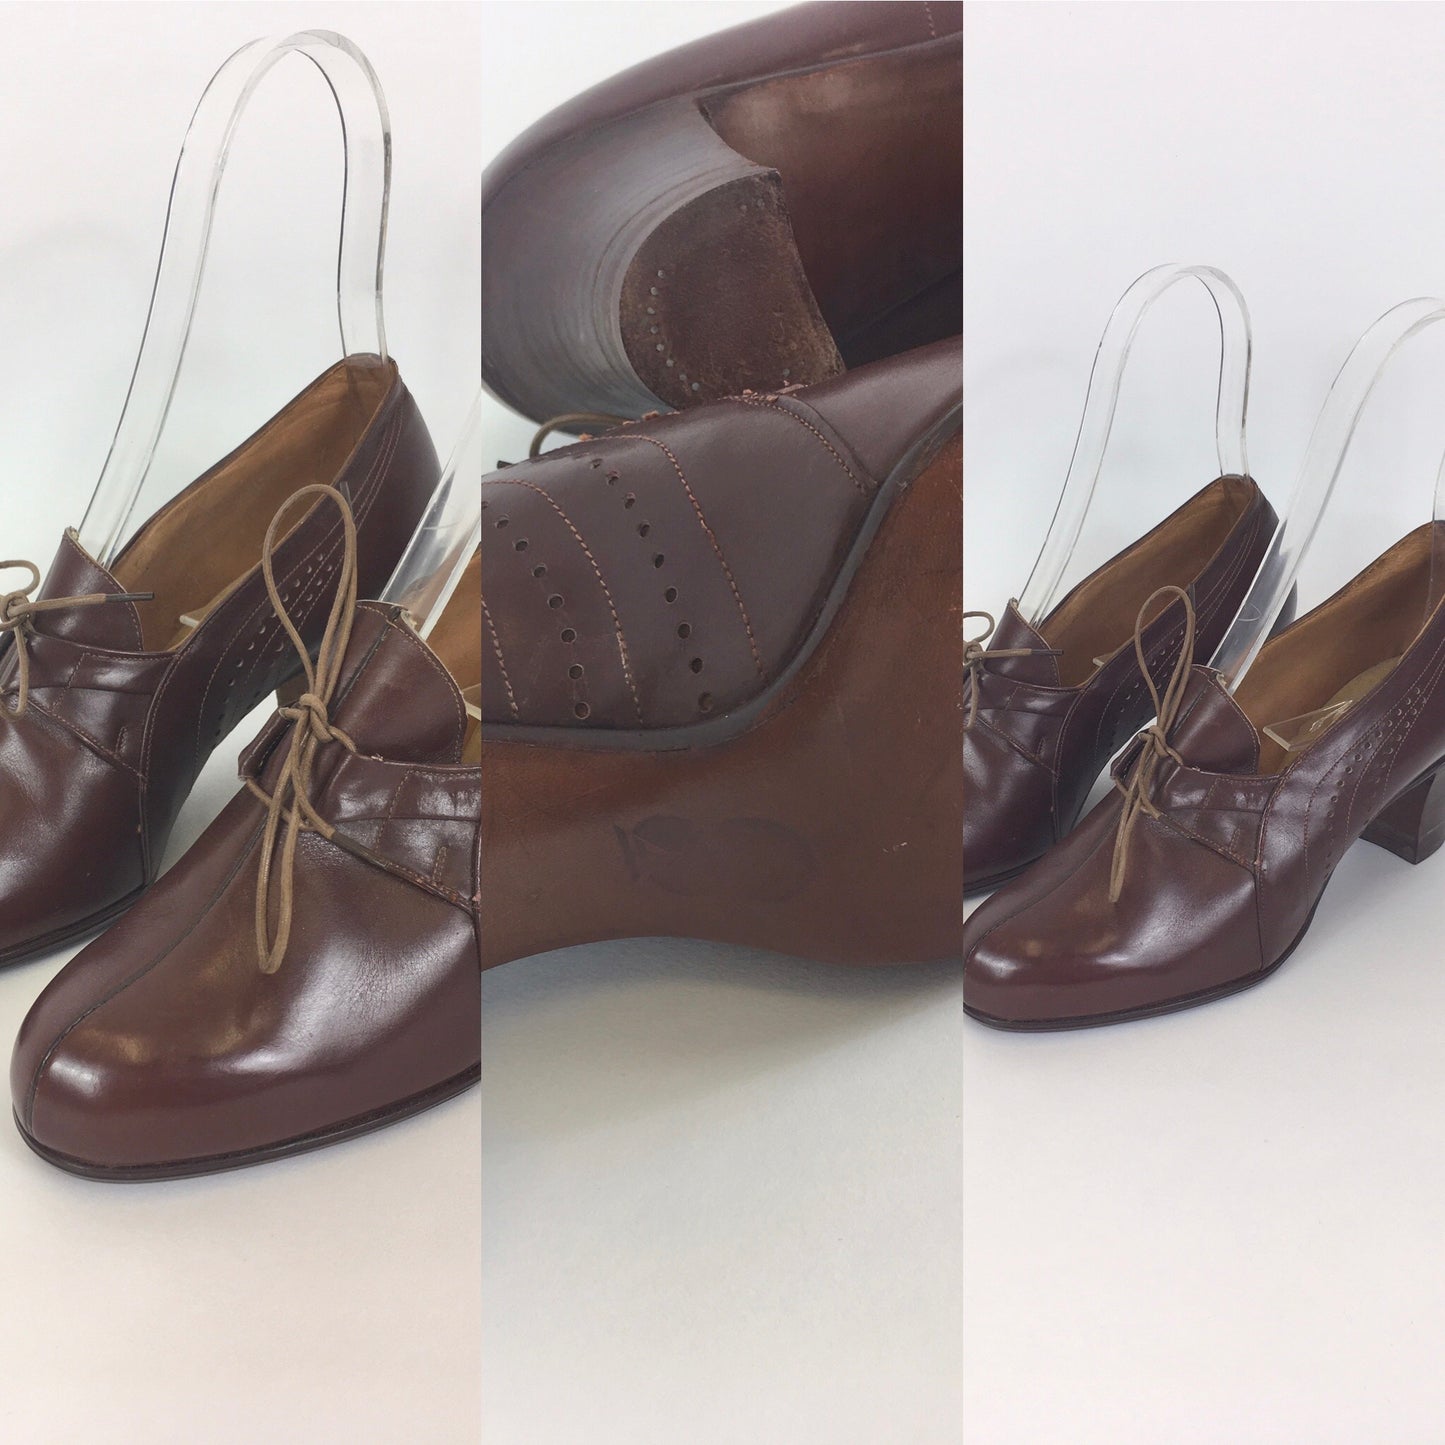 Original 1940’s STUNNING CC41 Brown Heeled Lace Up Brogues - By ‘ Cavette ‘